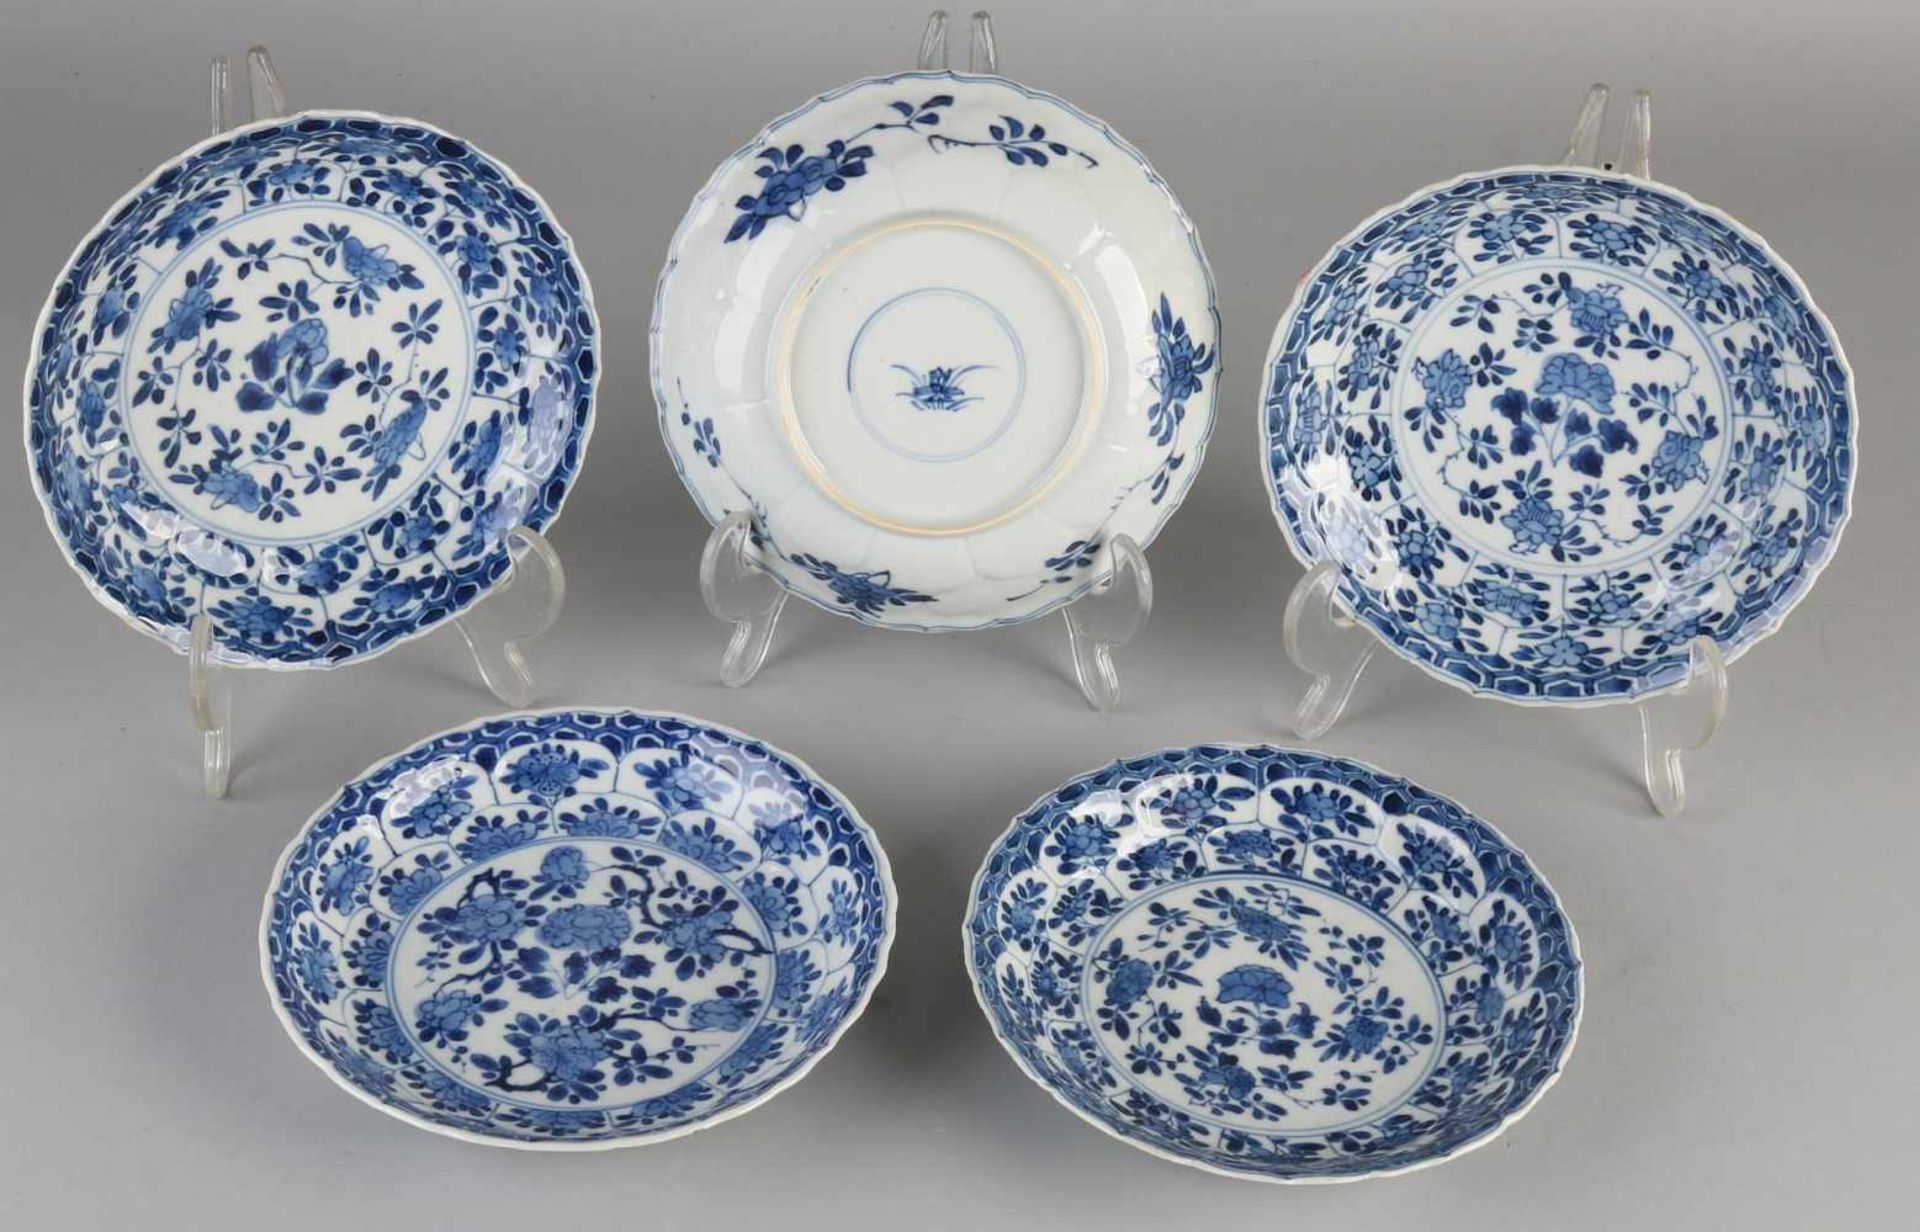 Five pieces of 18th century Chinese porcelain Kangxi plates with floral decoration, molded rim and